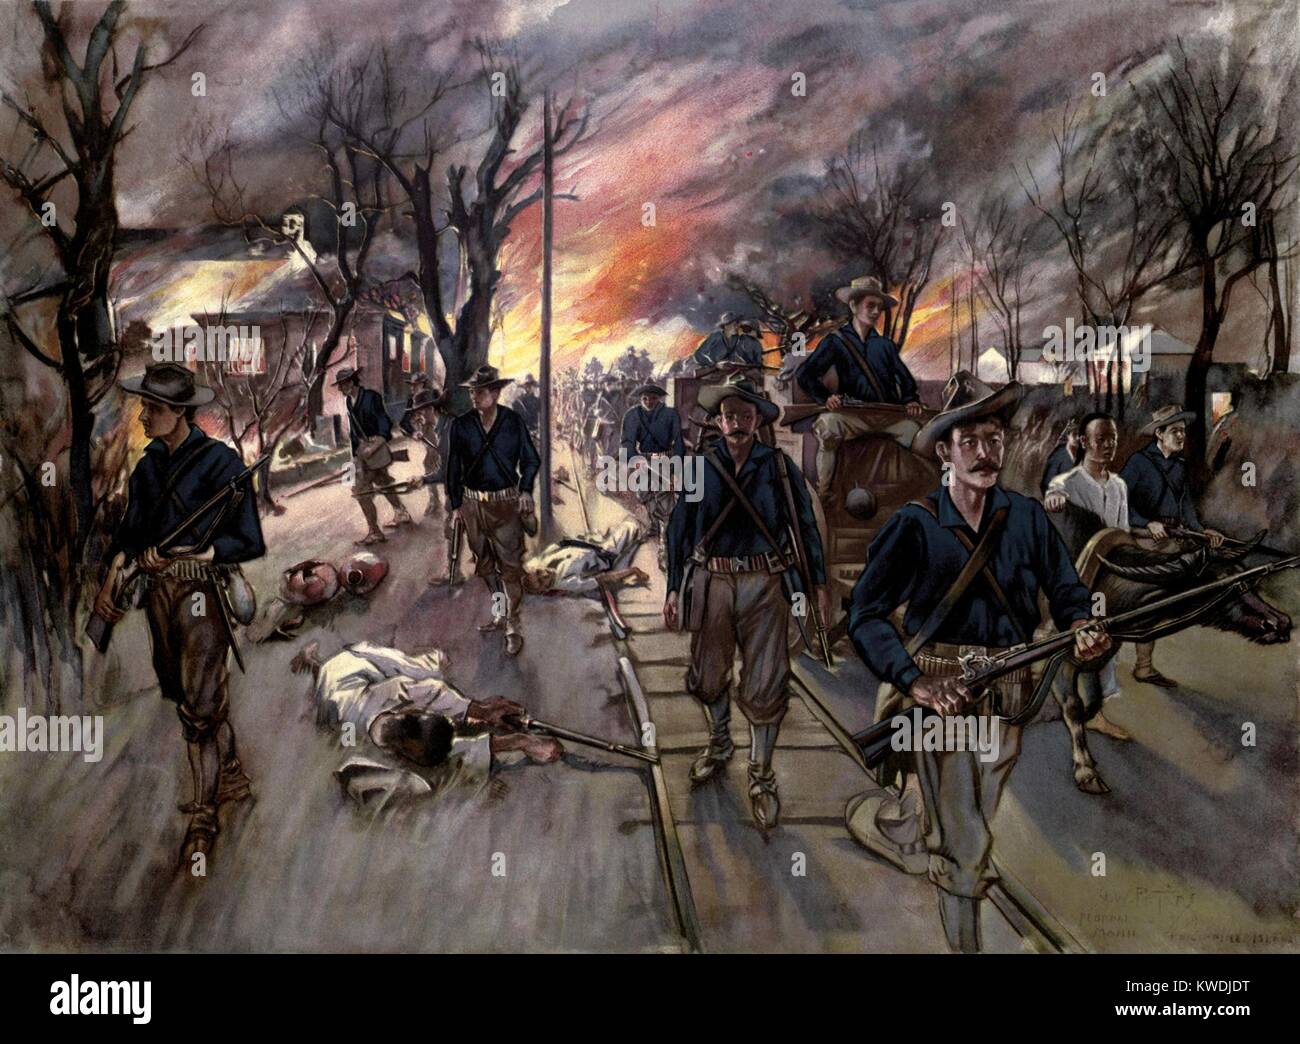 20th Kansas Volunteers marching through Caloocan at night after the battle of Feb. 10, 1899. Colonel Frederick Funstons unit guards an ammunition-train. Battle of Caloocan (2nd Battle of Manilla) took place 12 miles north of Manilla, during the Philippine-American War, between US occupation troops and Filipino insurgents, who retreated toward their capital, Malolos (BSLOC 2017 10 74) Stock Photo